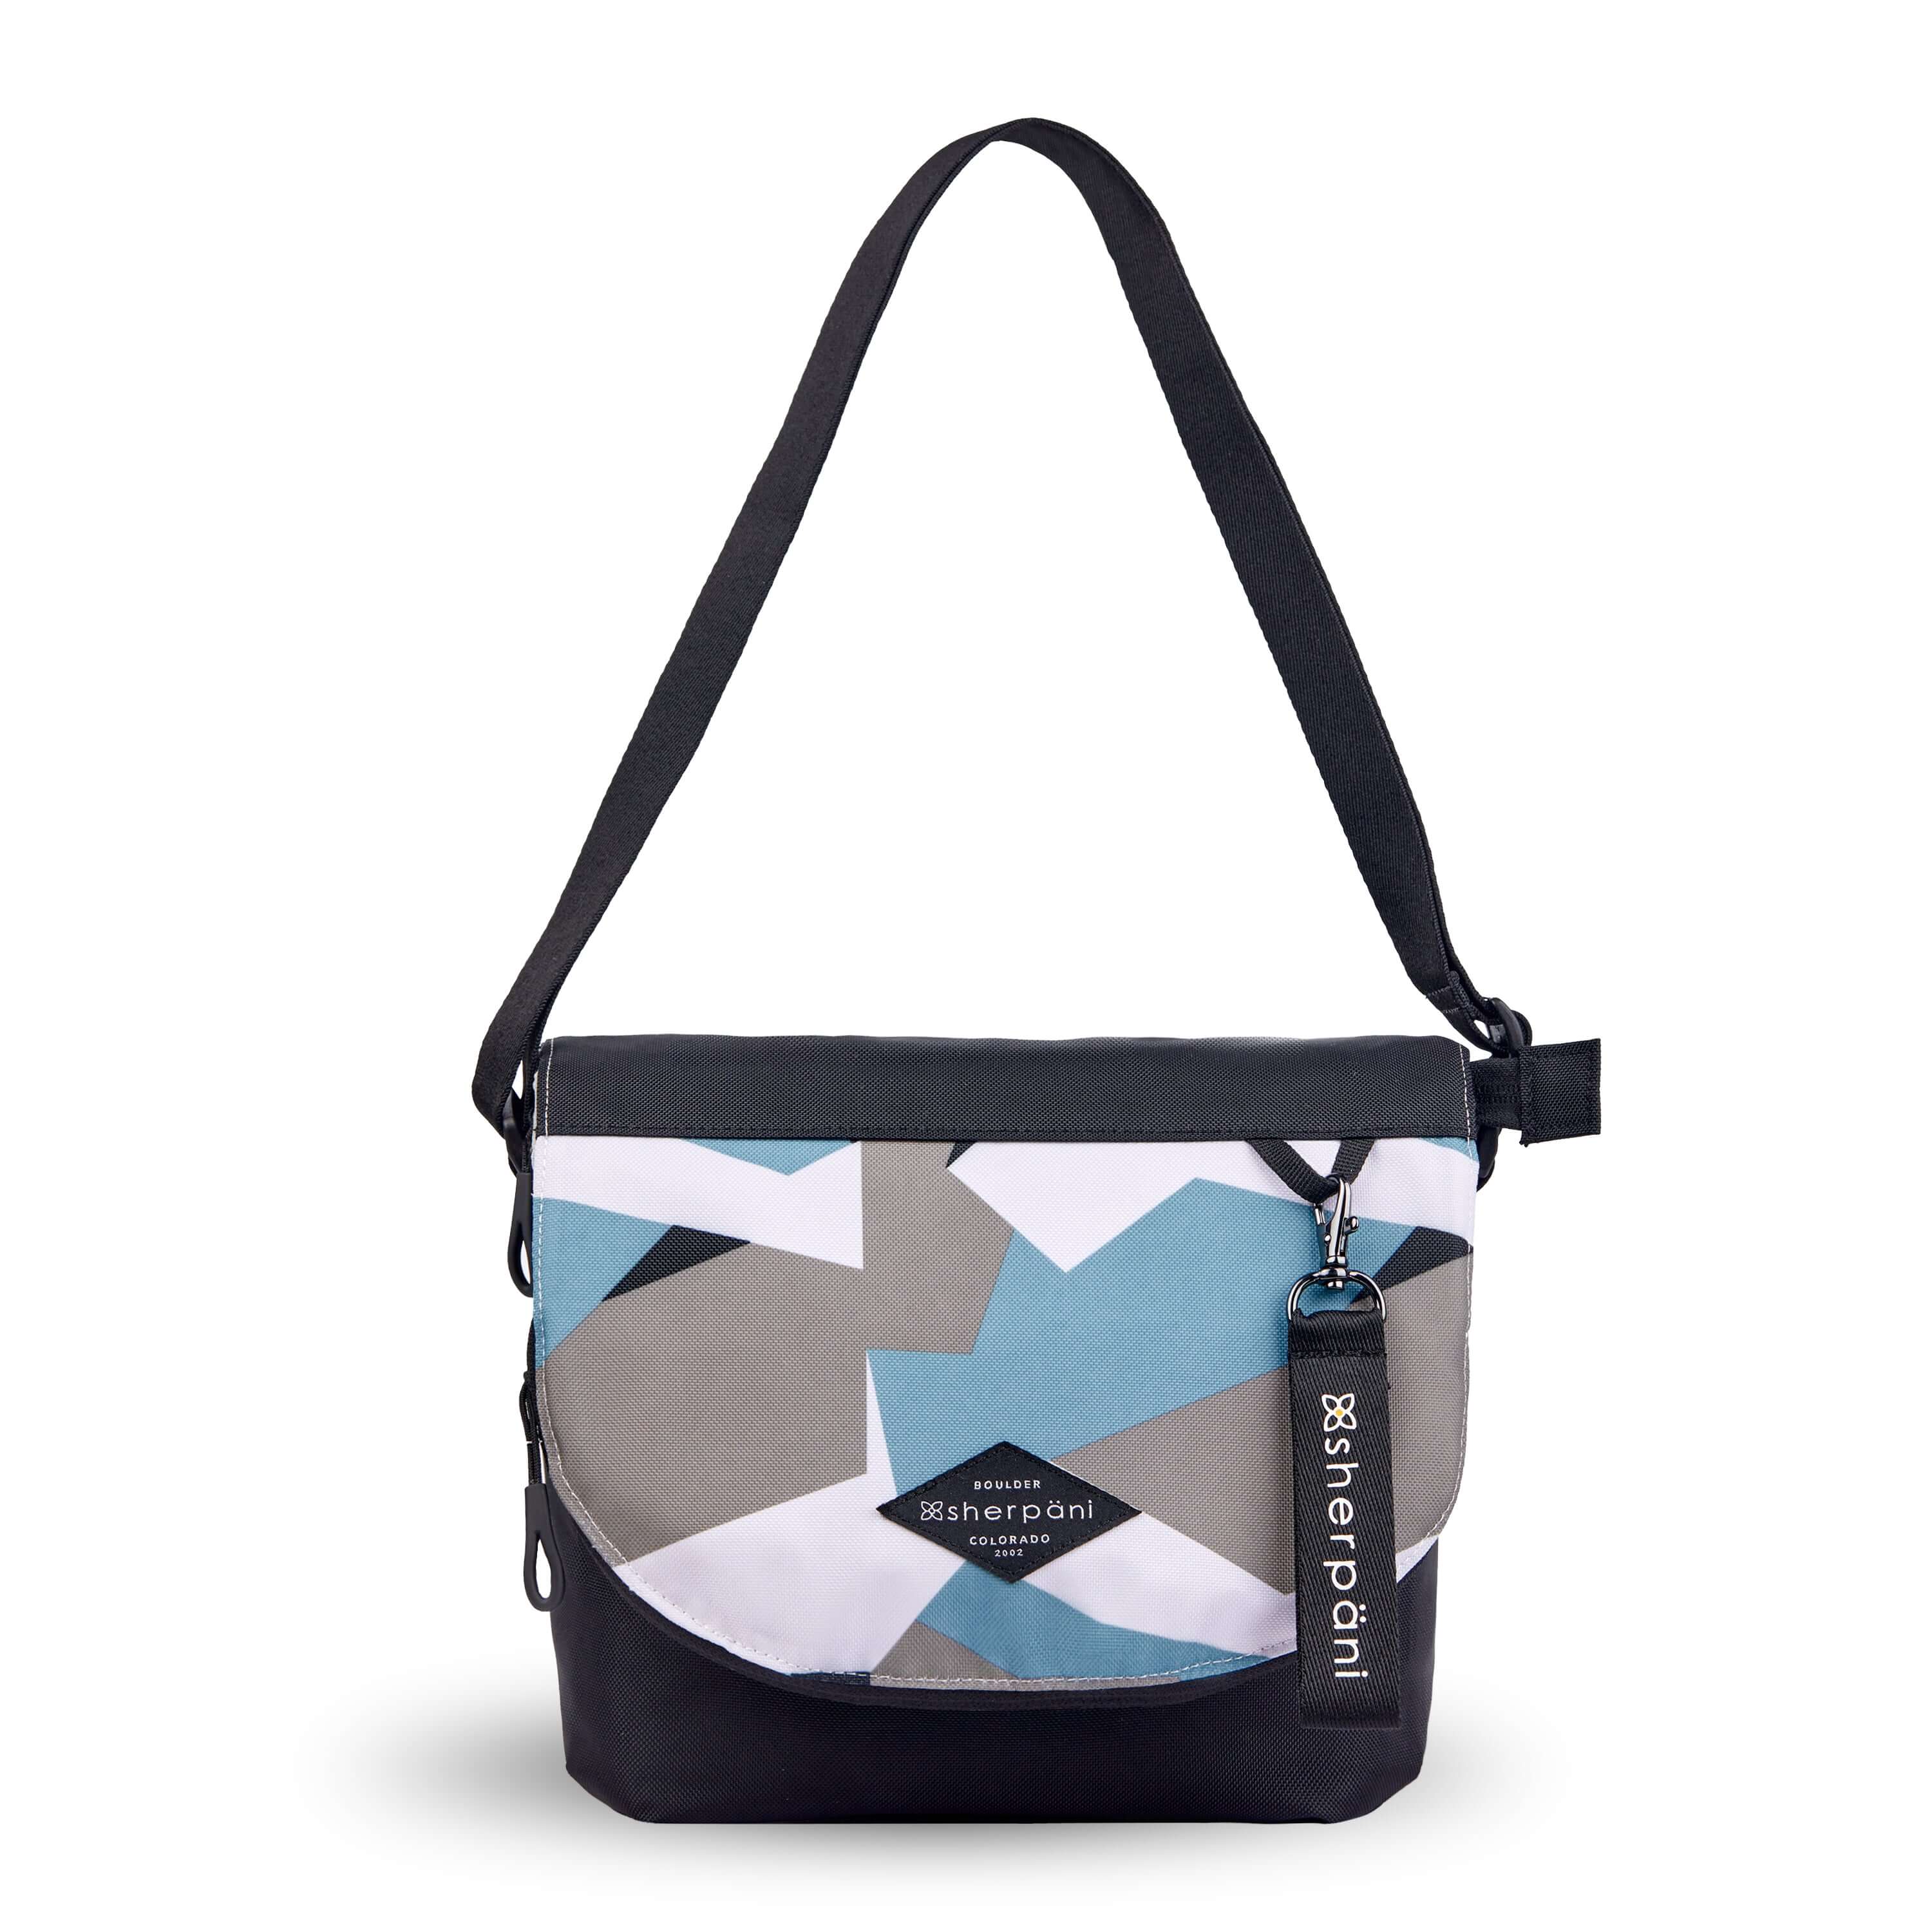 Flat front view of Sherpani crossbody, the Milli in Summer Camo. The messenger style bag is two-toned: the layover flap is a camouflage pattern of light blue, gray and white, the remainder of the bag is black. Easy-pull zippers are accented in black. The bag has an adjustable crossbody strap. A branded Sherpani keychain is clipped to a fabric loop in the upper right corner.